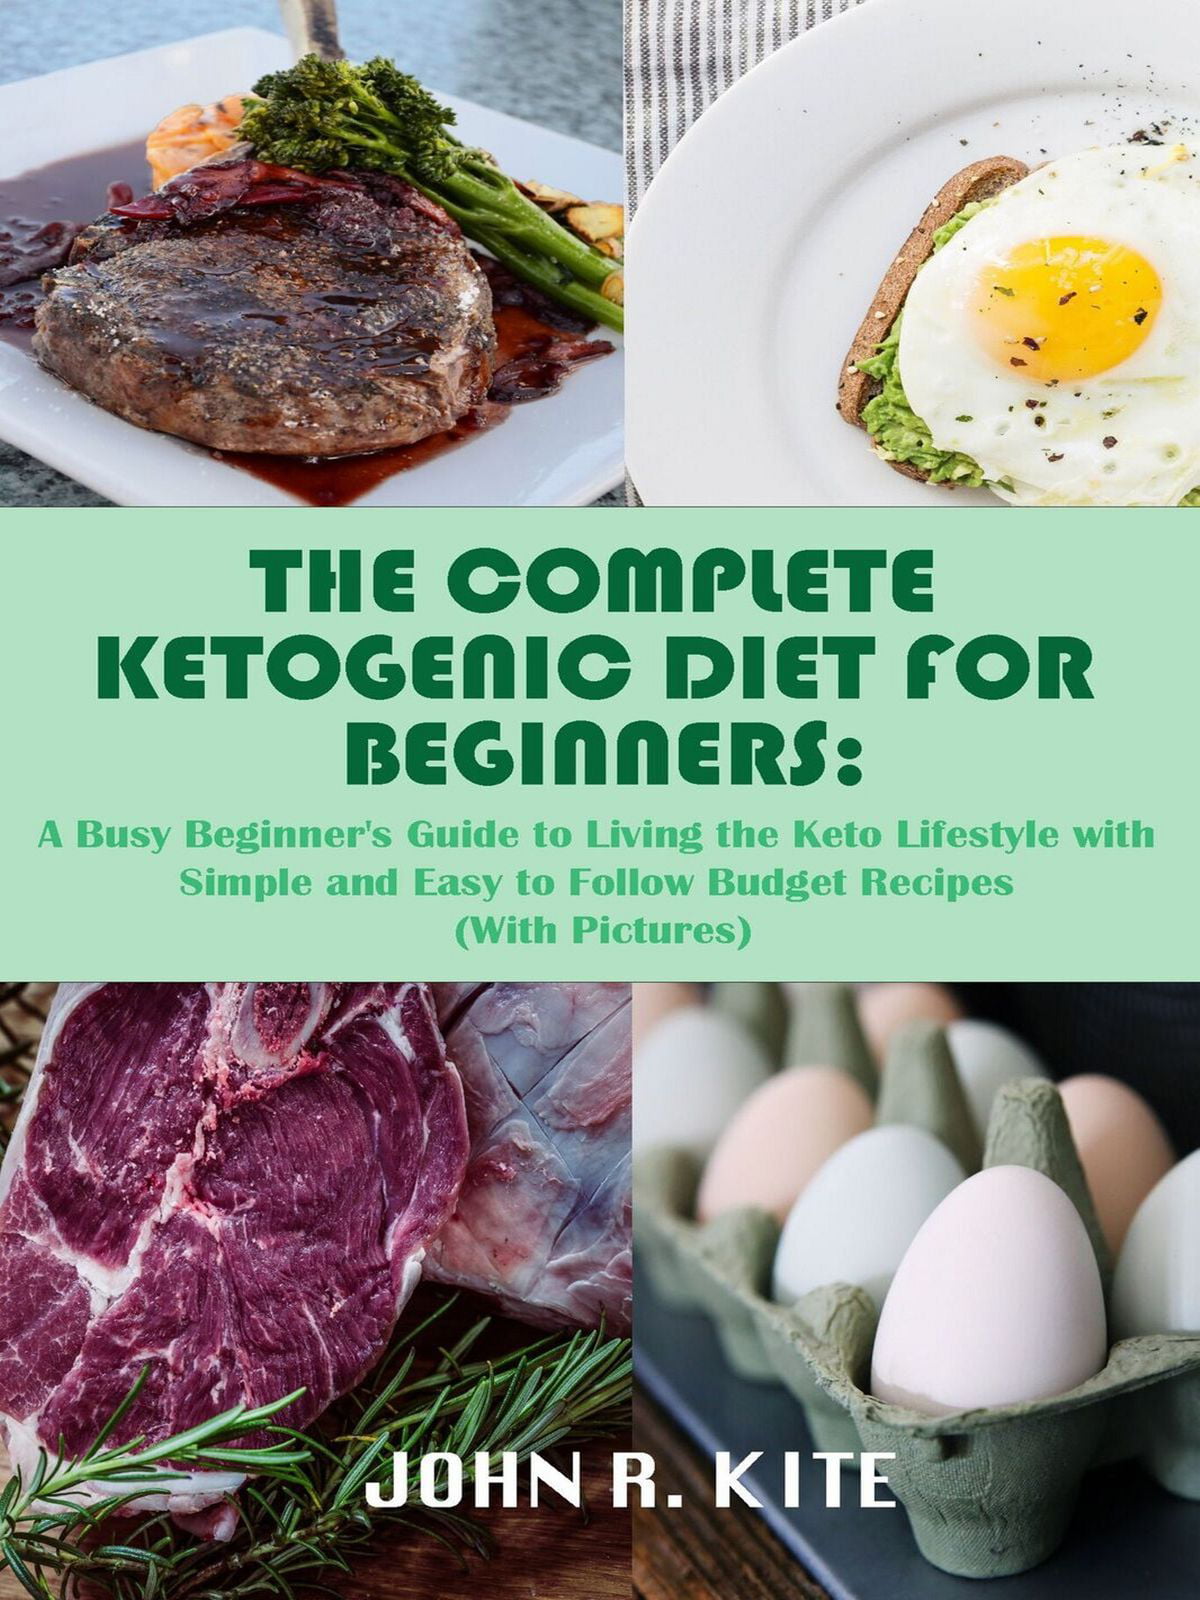 The Complete Ketogenic Diet for Beginners: A Busy Beginner's Guide to ...